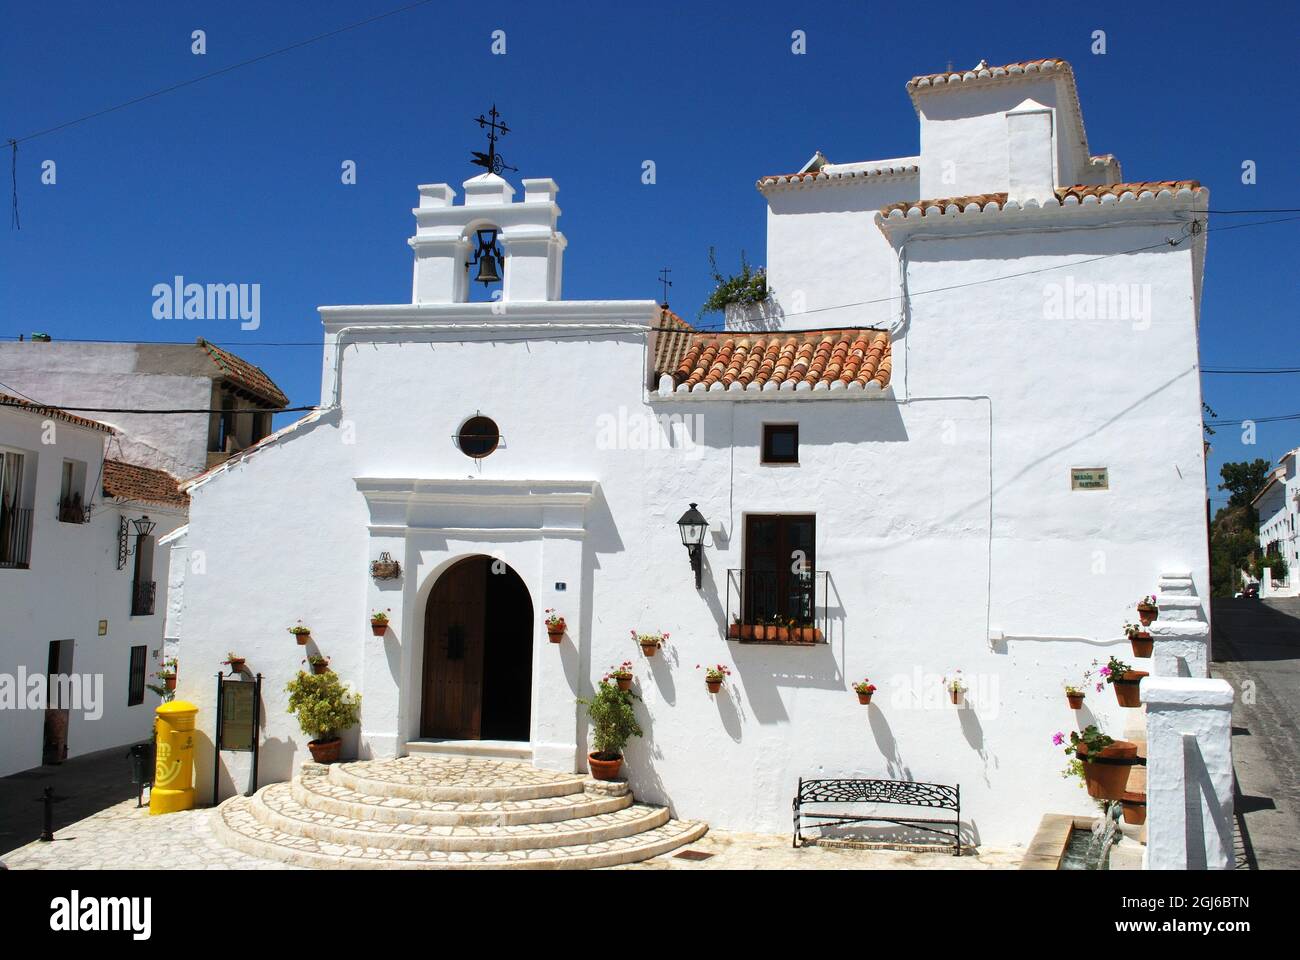 Church of our lady of Los Remedios (Also known as Ermita de Santa Ana) in the old town, Mijas, Spain. Stock Photo